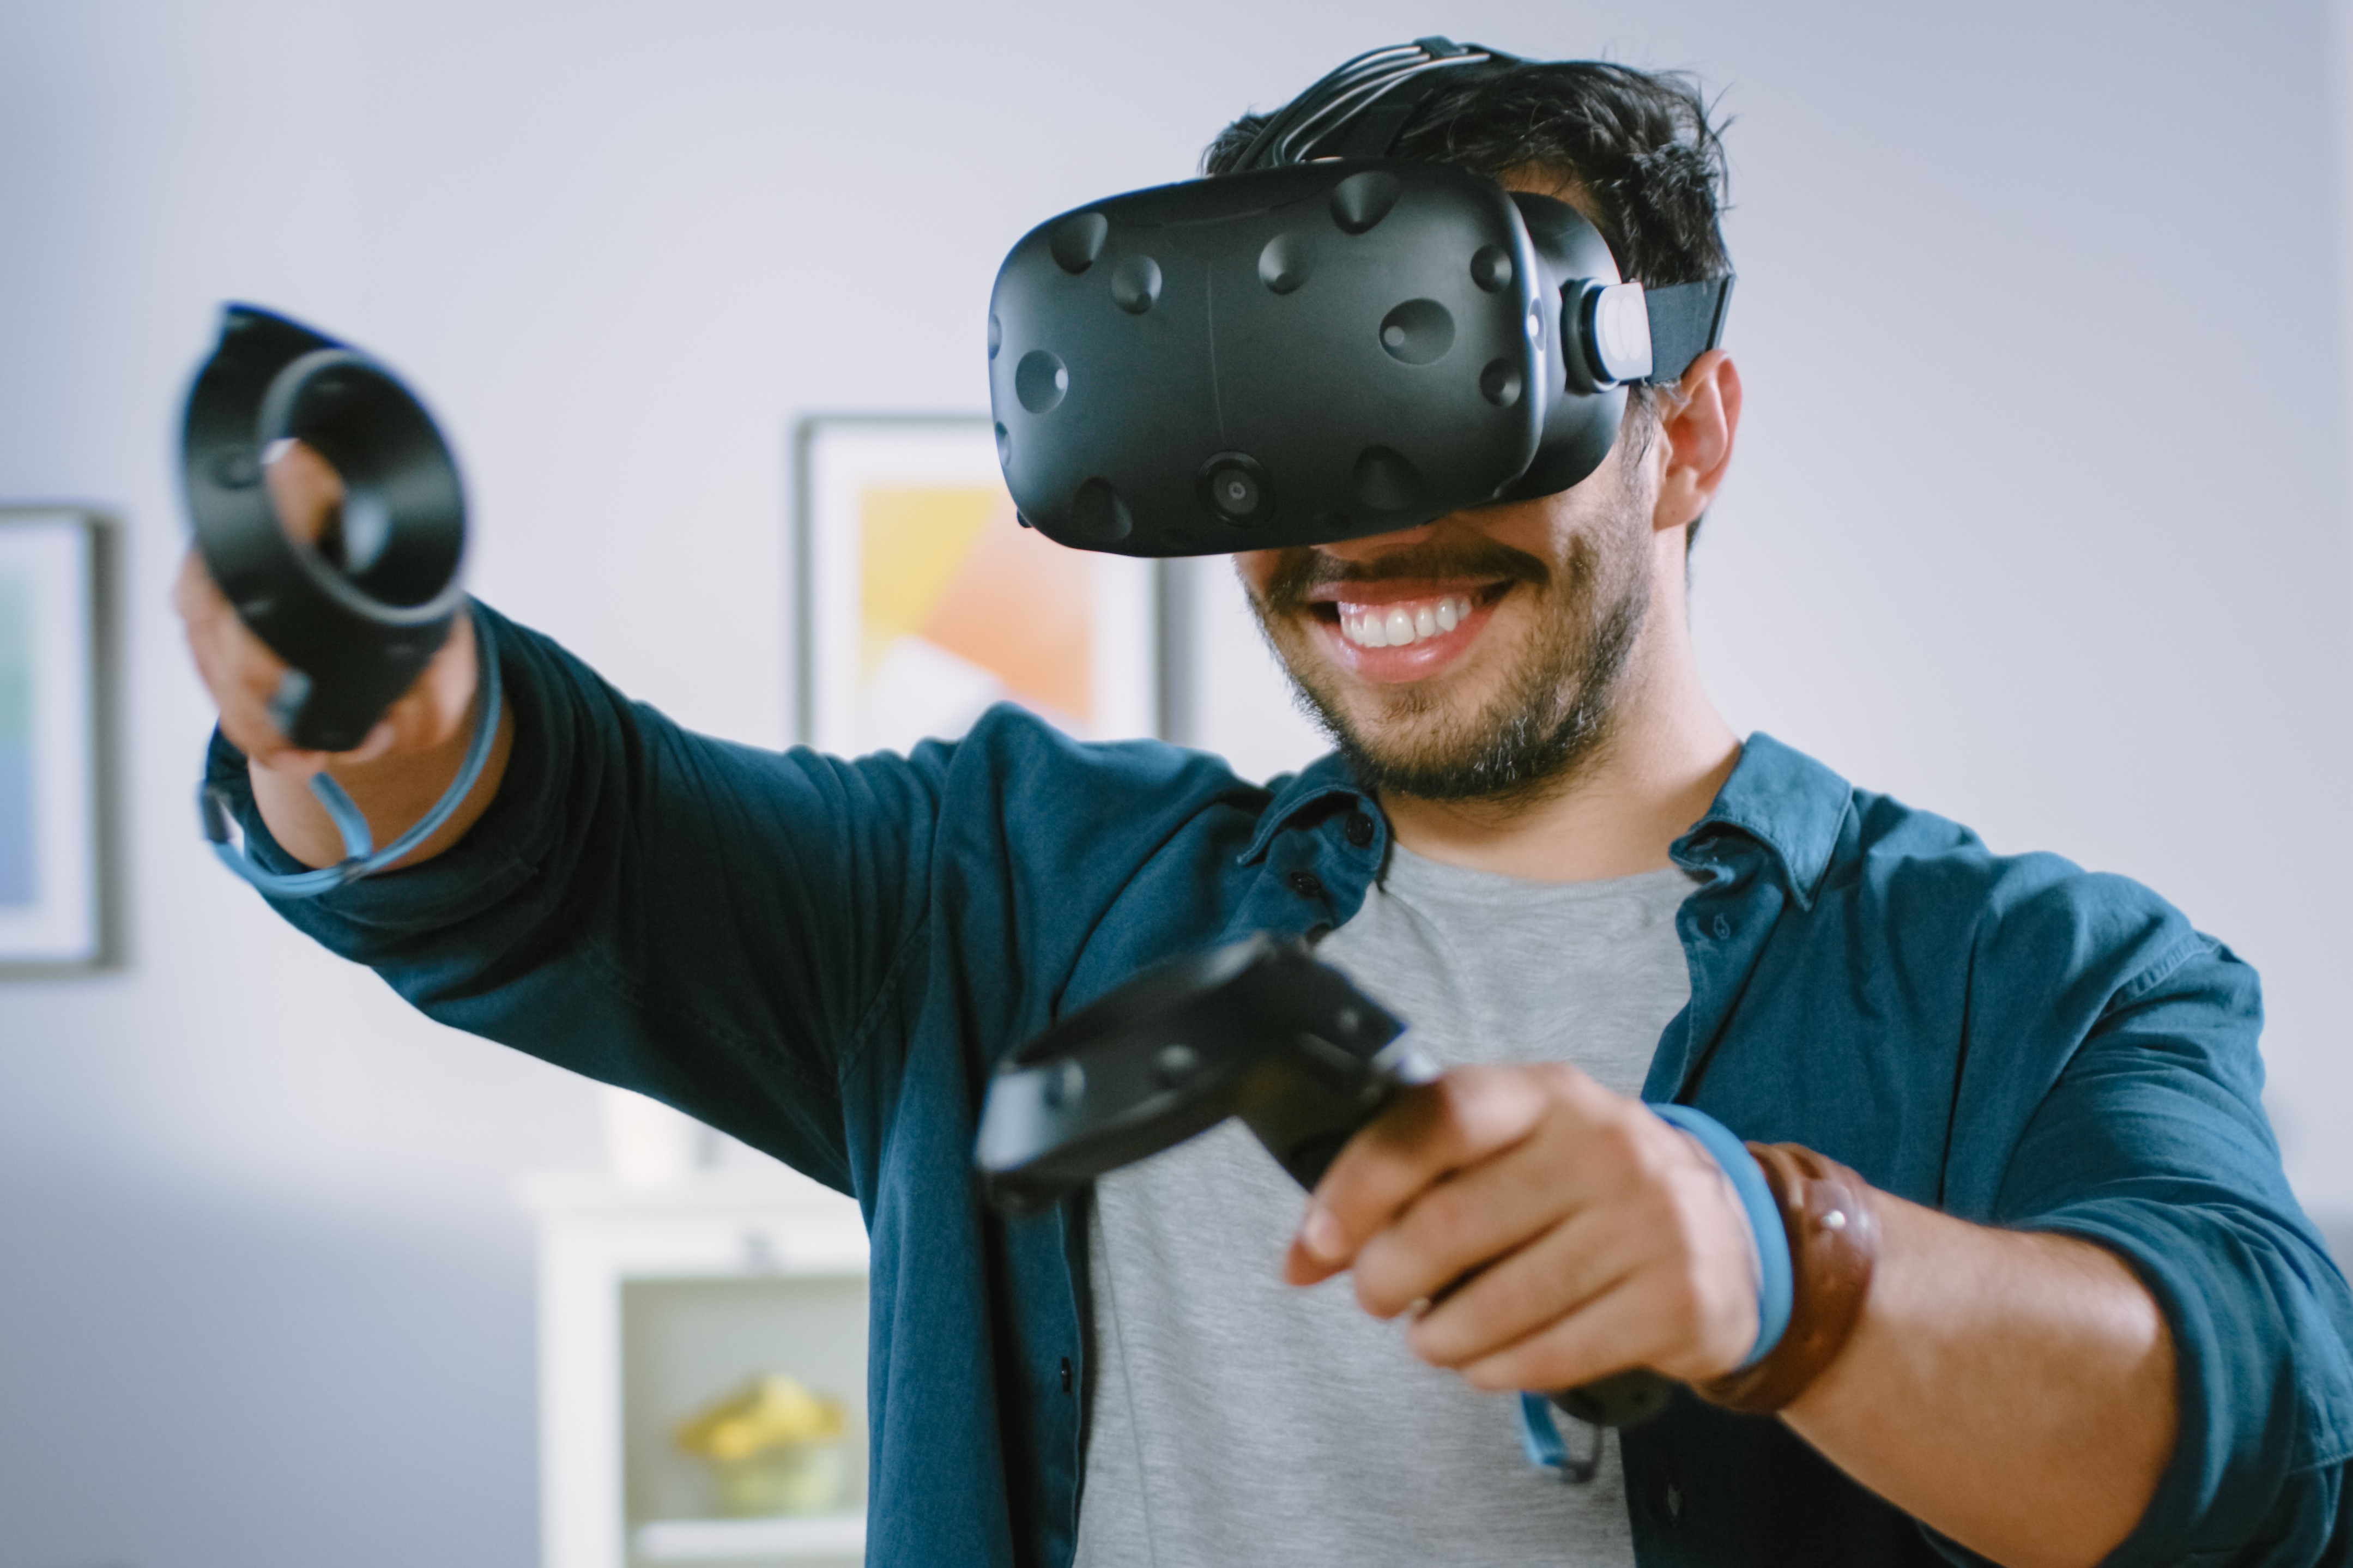 A man uses a VR headset while playing a game.